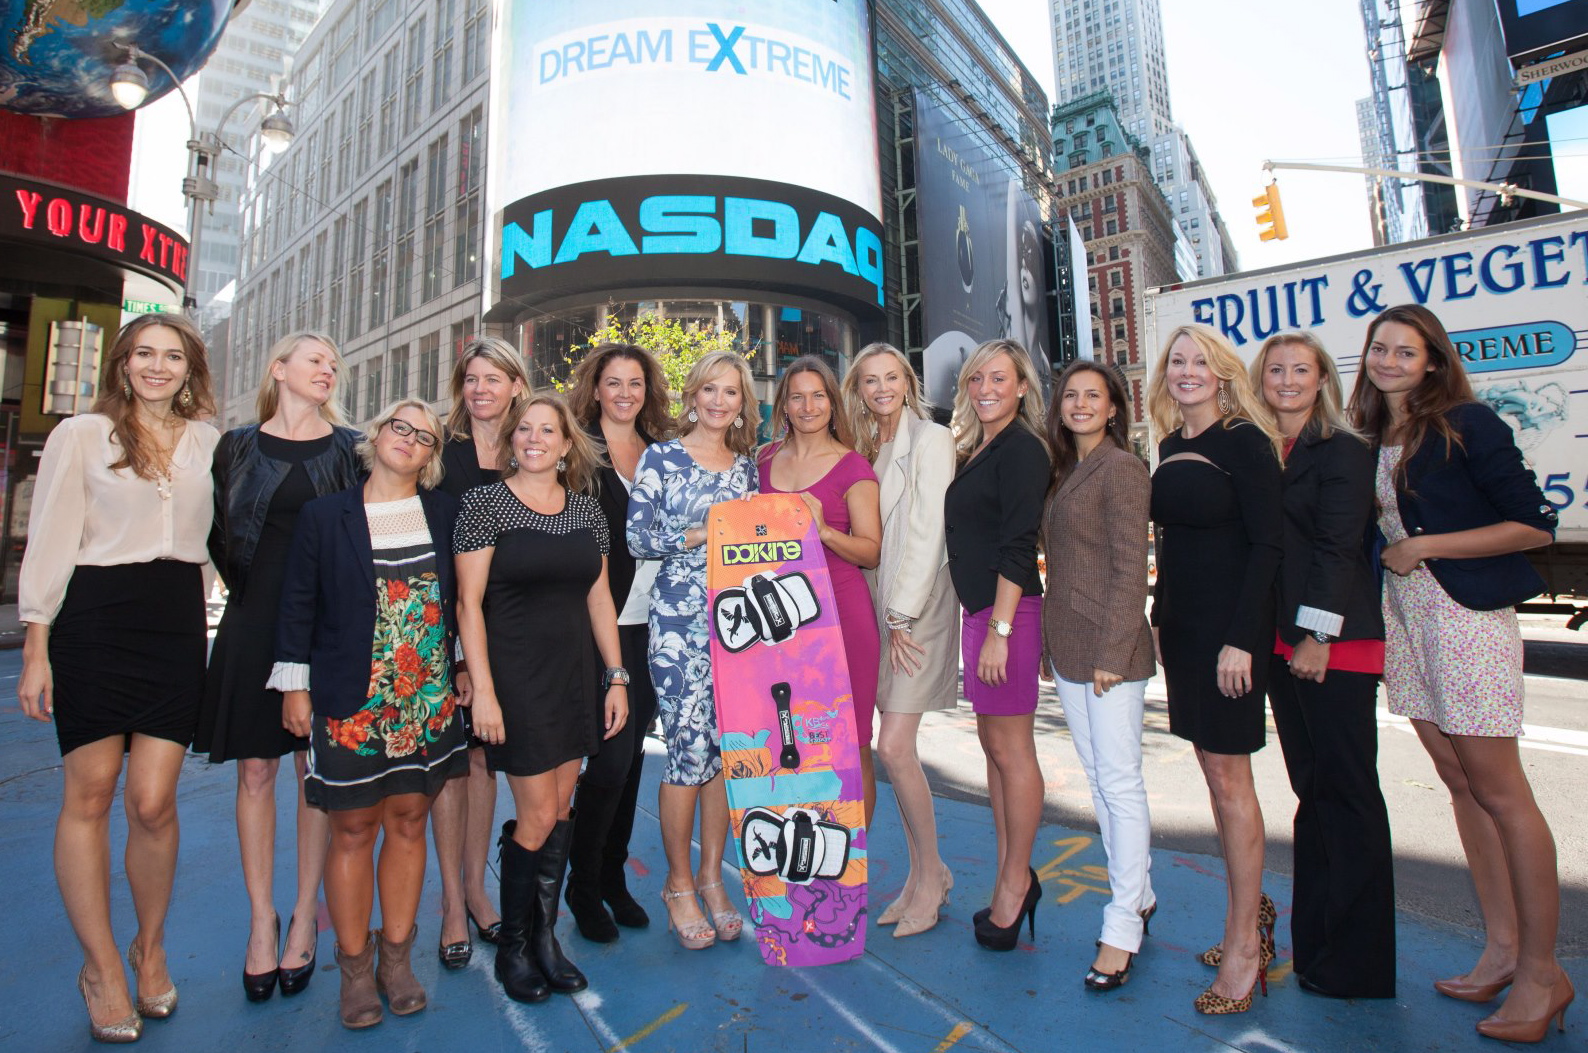 We kicked off Dream Extreme by ringing the NASDAQ opening bell in Times Square- it was awesome! That's me on the far left.